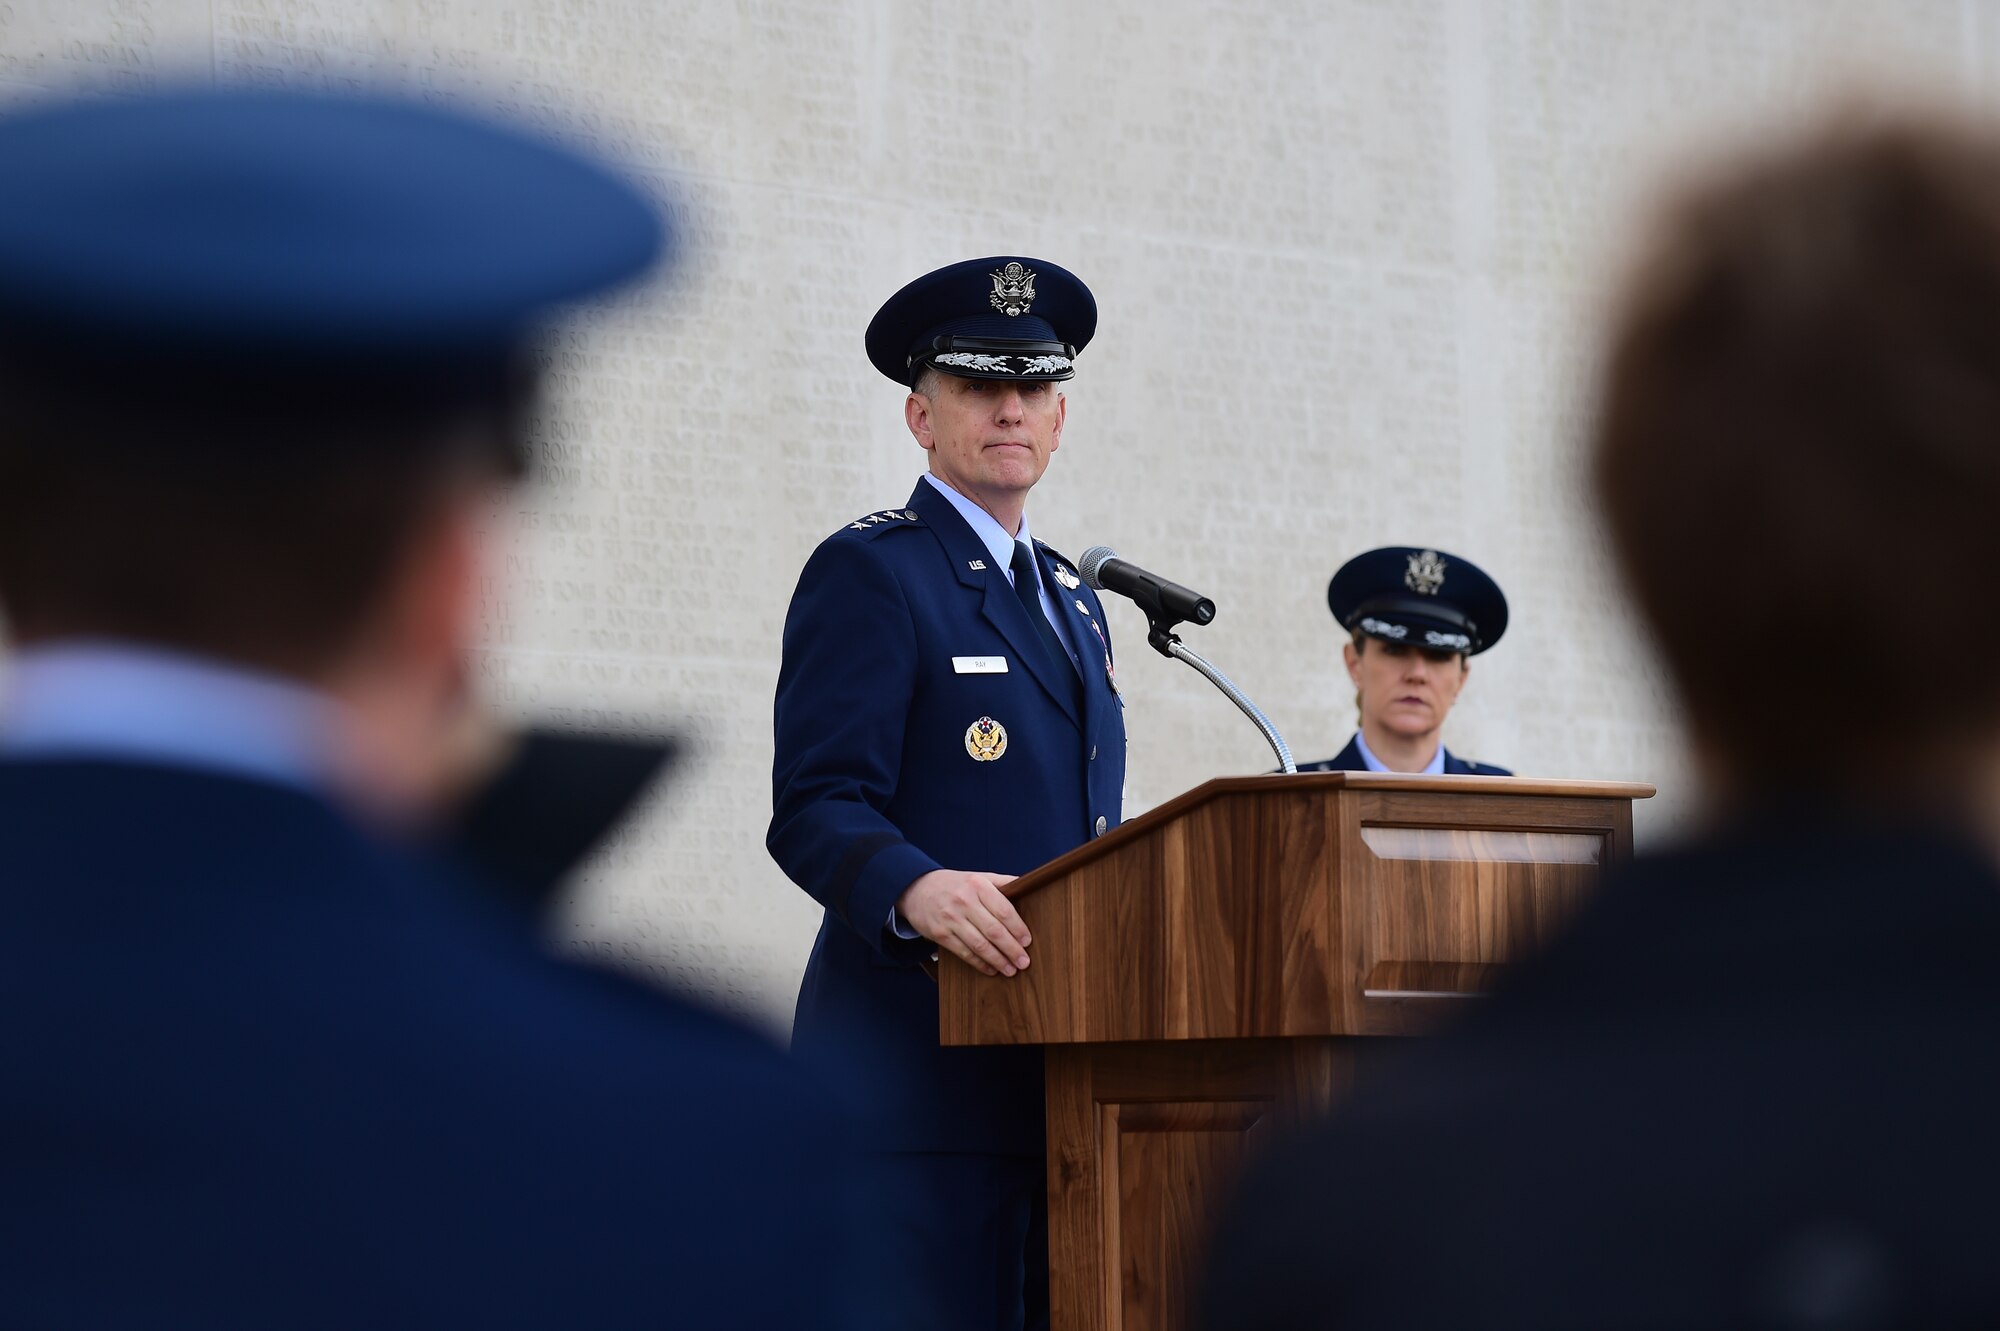 U.S. Air Force Lt. Gen. Timothy Ray, the 3rd Air Force and 17th Expeditionary Air Force commander, speaks during a Veterans Day ceremony at Cambridge American Cemetery, United Kingdom, Nov. 11, 2015. During Ray’s speech he reminded the guests to never forget the heroes who came before. (U.S. Air Force photo by Master Sgt. Chrissy Best/Released)